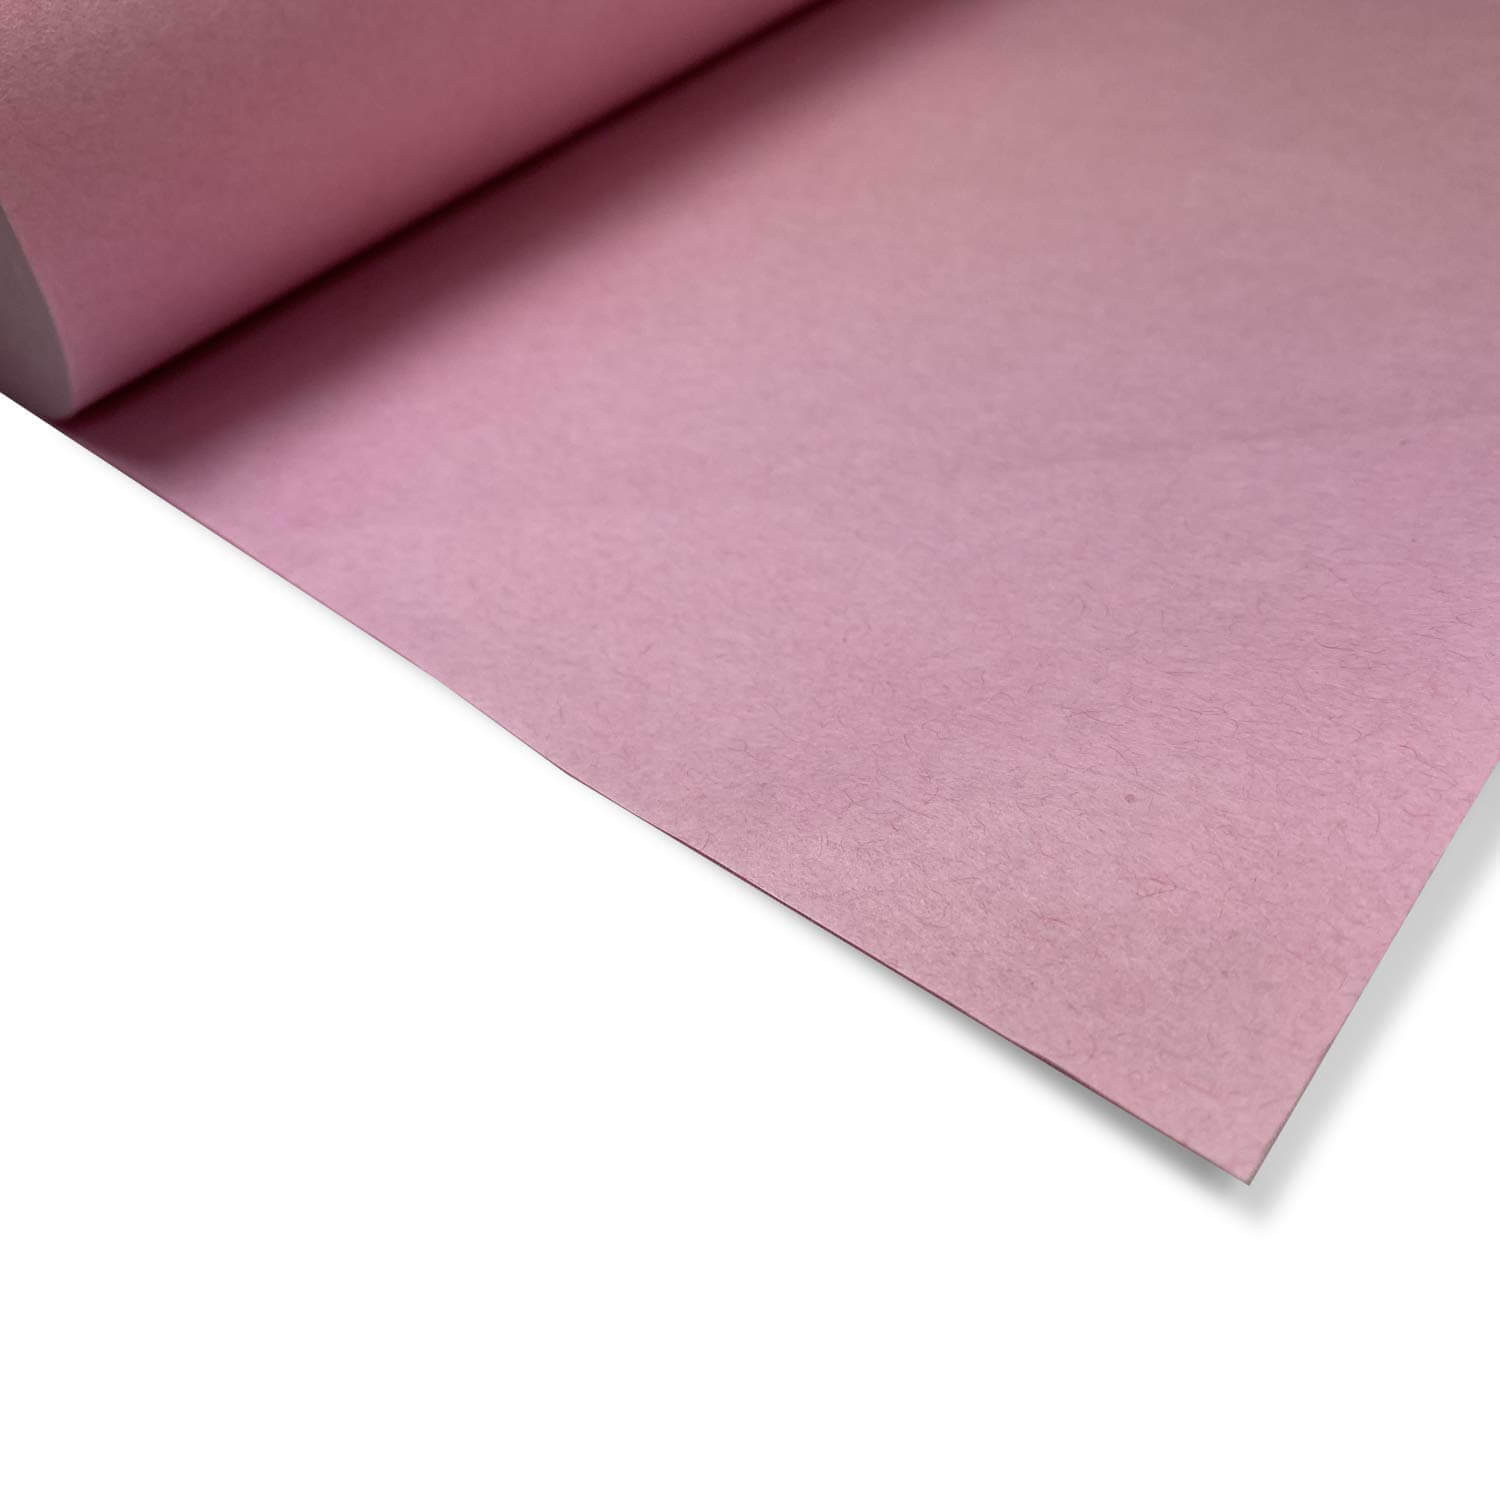 18 x 180 Pink Butcher Paper Roll for Cooking, Smoking and Packing Meat and  Fish buy in stock in U.S. in IDL Packaging